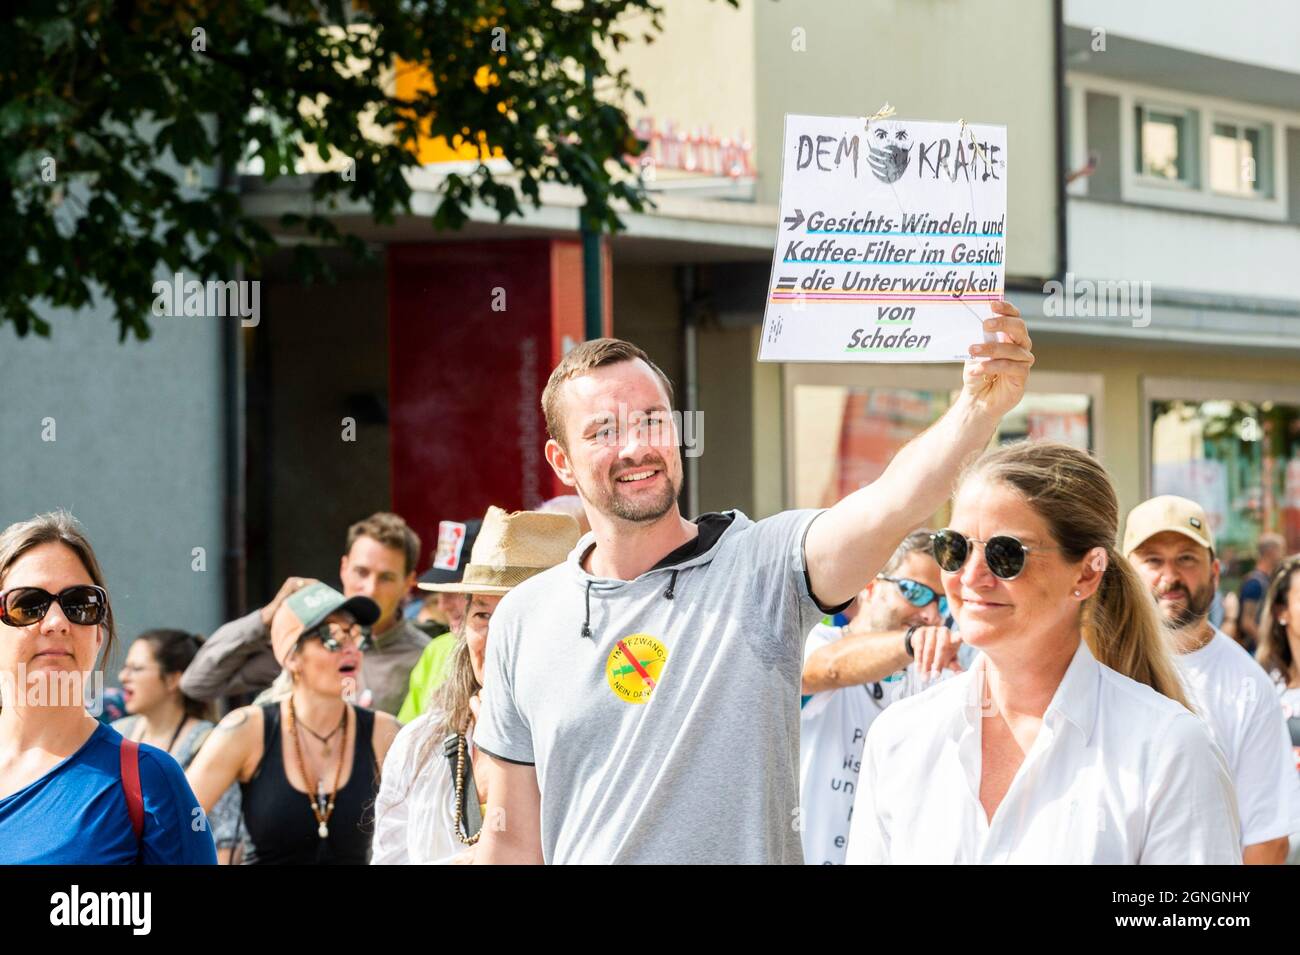 Corona Vaccine opponents are demonstrating againts the corona measures in Switzerland in Uster on the 25.09.21 Credit: Tim Eckert/Alamy Live News Credit: Tim Eckert/Alamy Live News Stock Photo